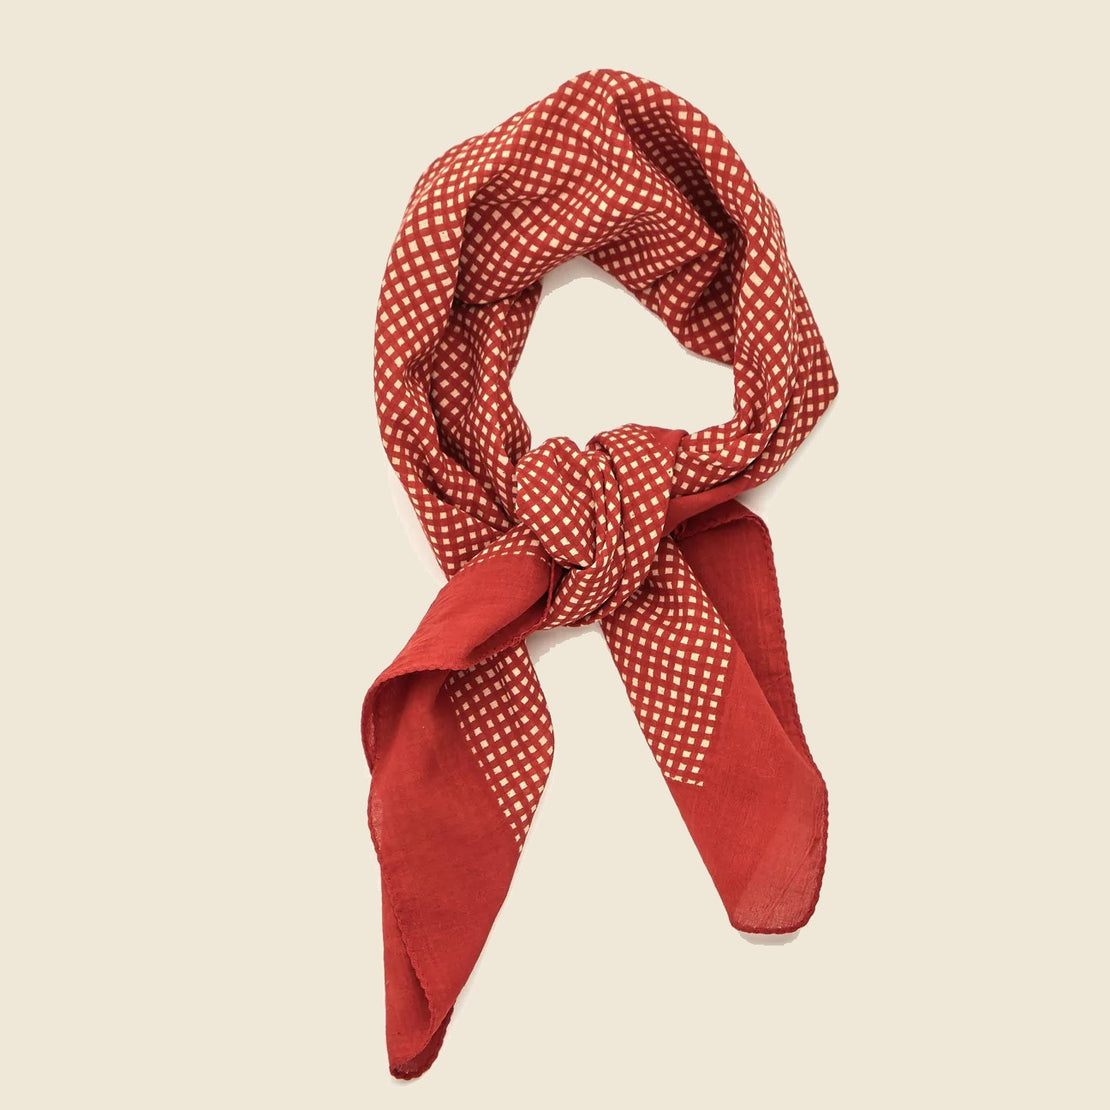 Dabu Plaid - Red Madder - Red Road - STAG Provisions - W - Accessories - Scarf